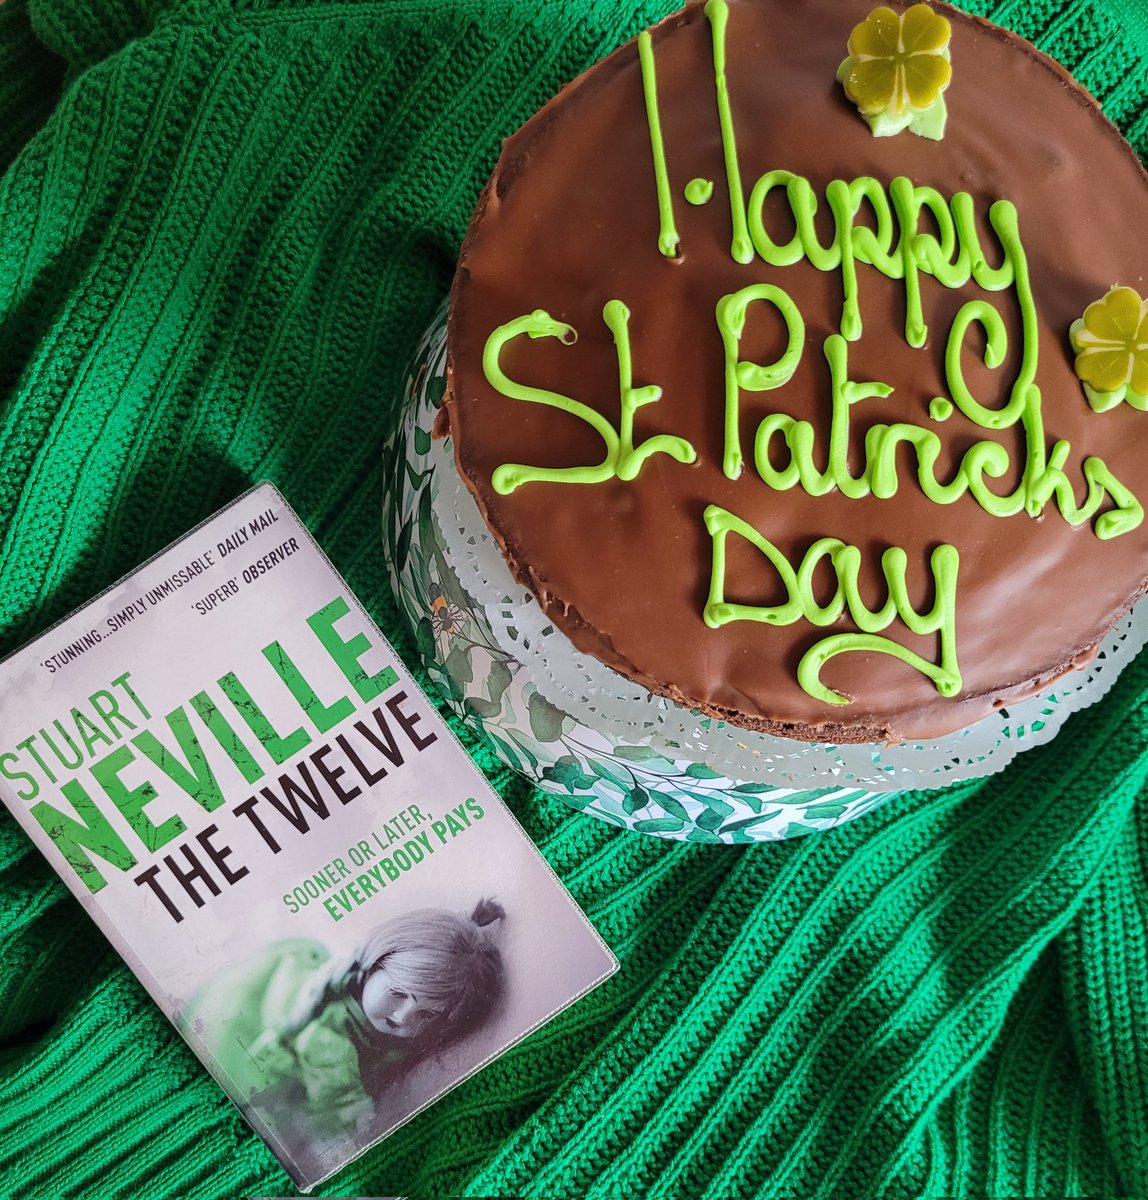 Happy St Patrick's Day. A re-read of one of my fav books from my favourite N Irish author Stuart Neville for an upcoming book club ☘️ #stpatricksday #Irishauthors #Stuartneville